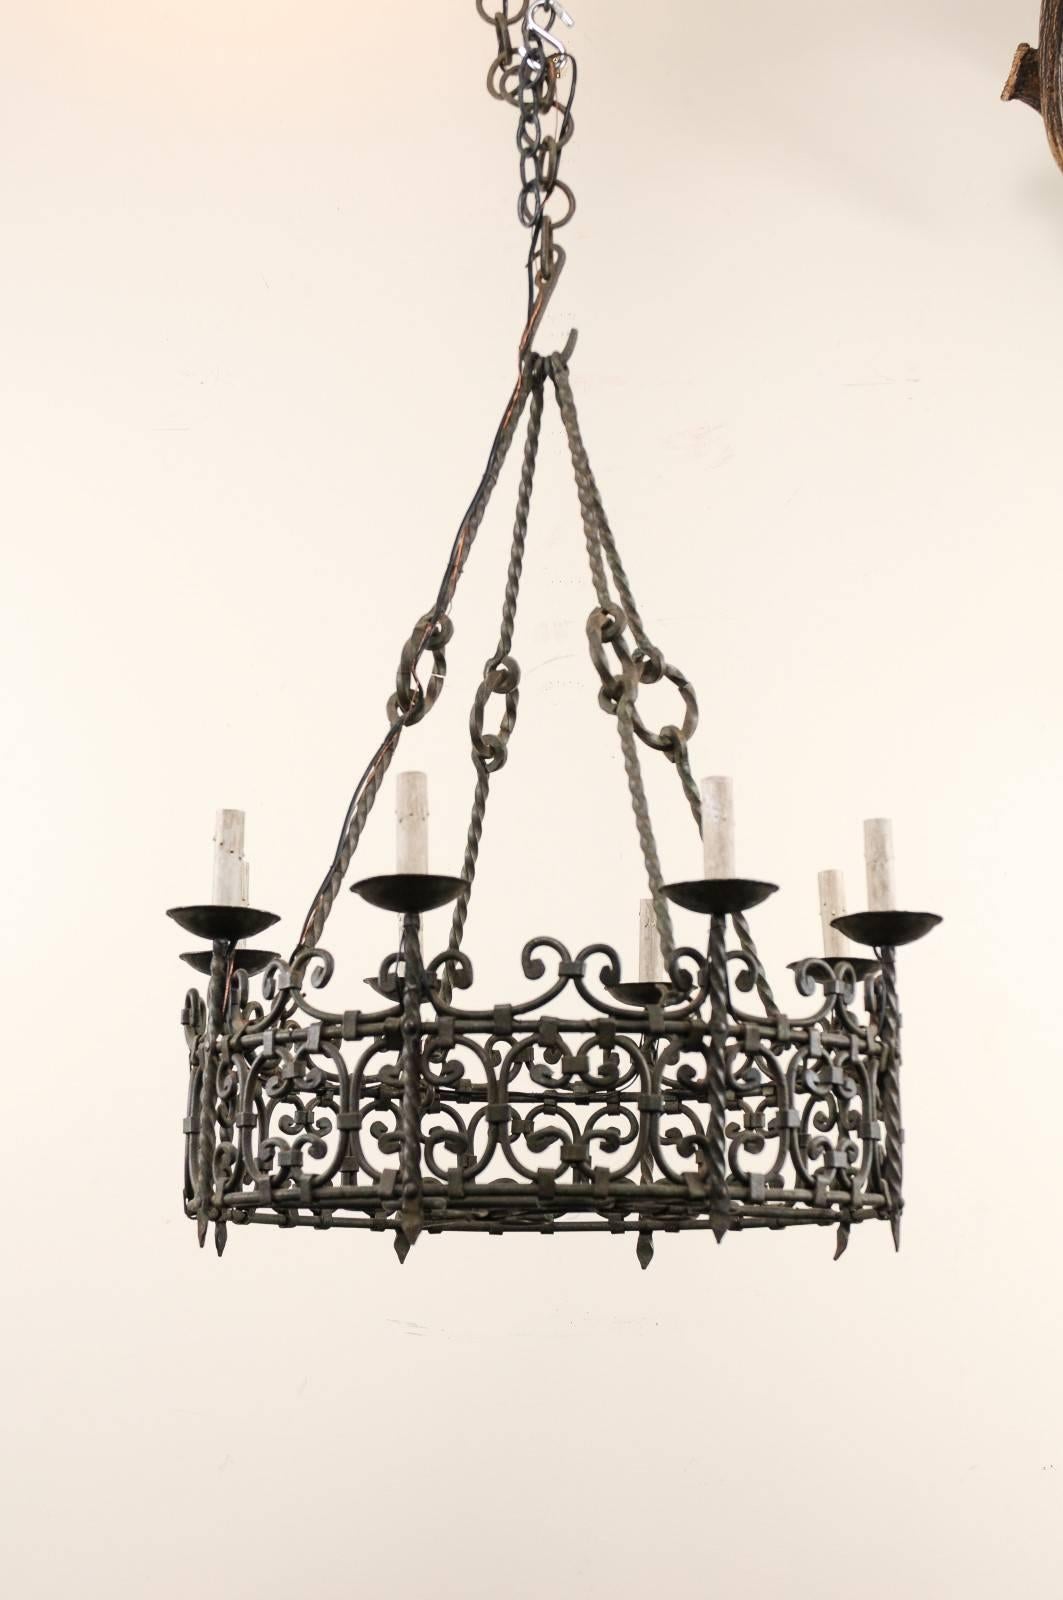 Patinated Eight-Light Intricately Scrolled Dark Iron Ring Chandelier, Mid-20th Century For Sale